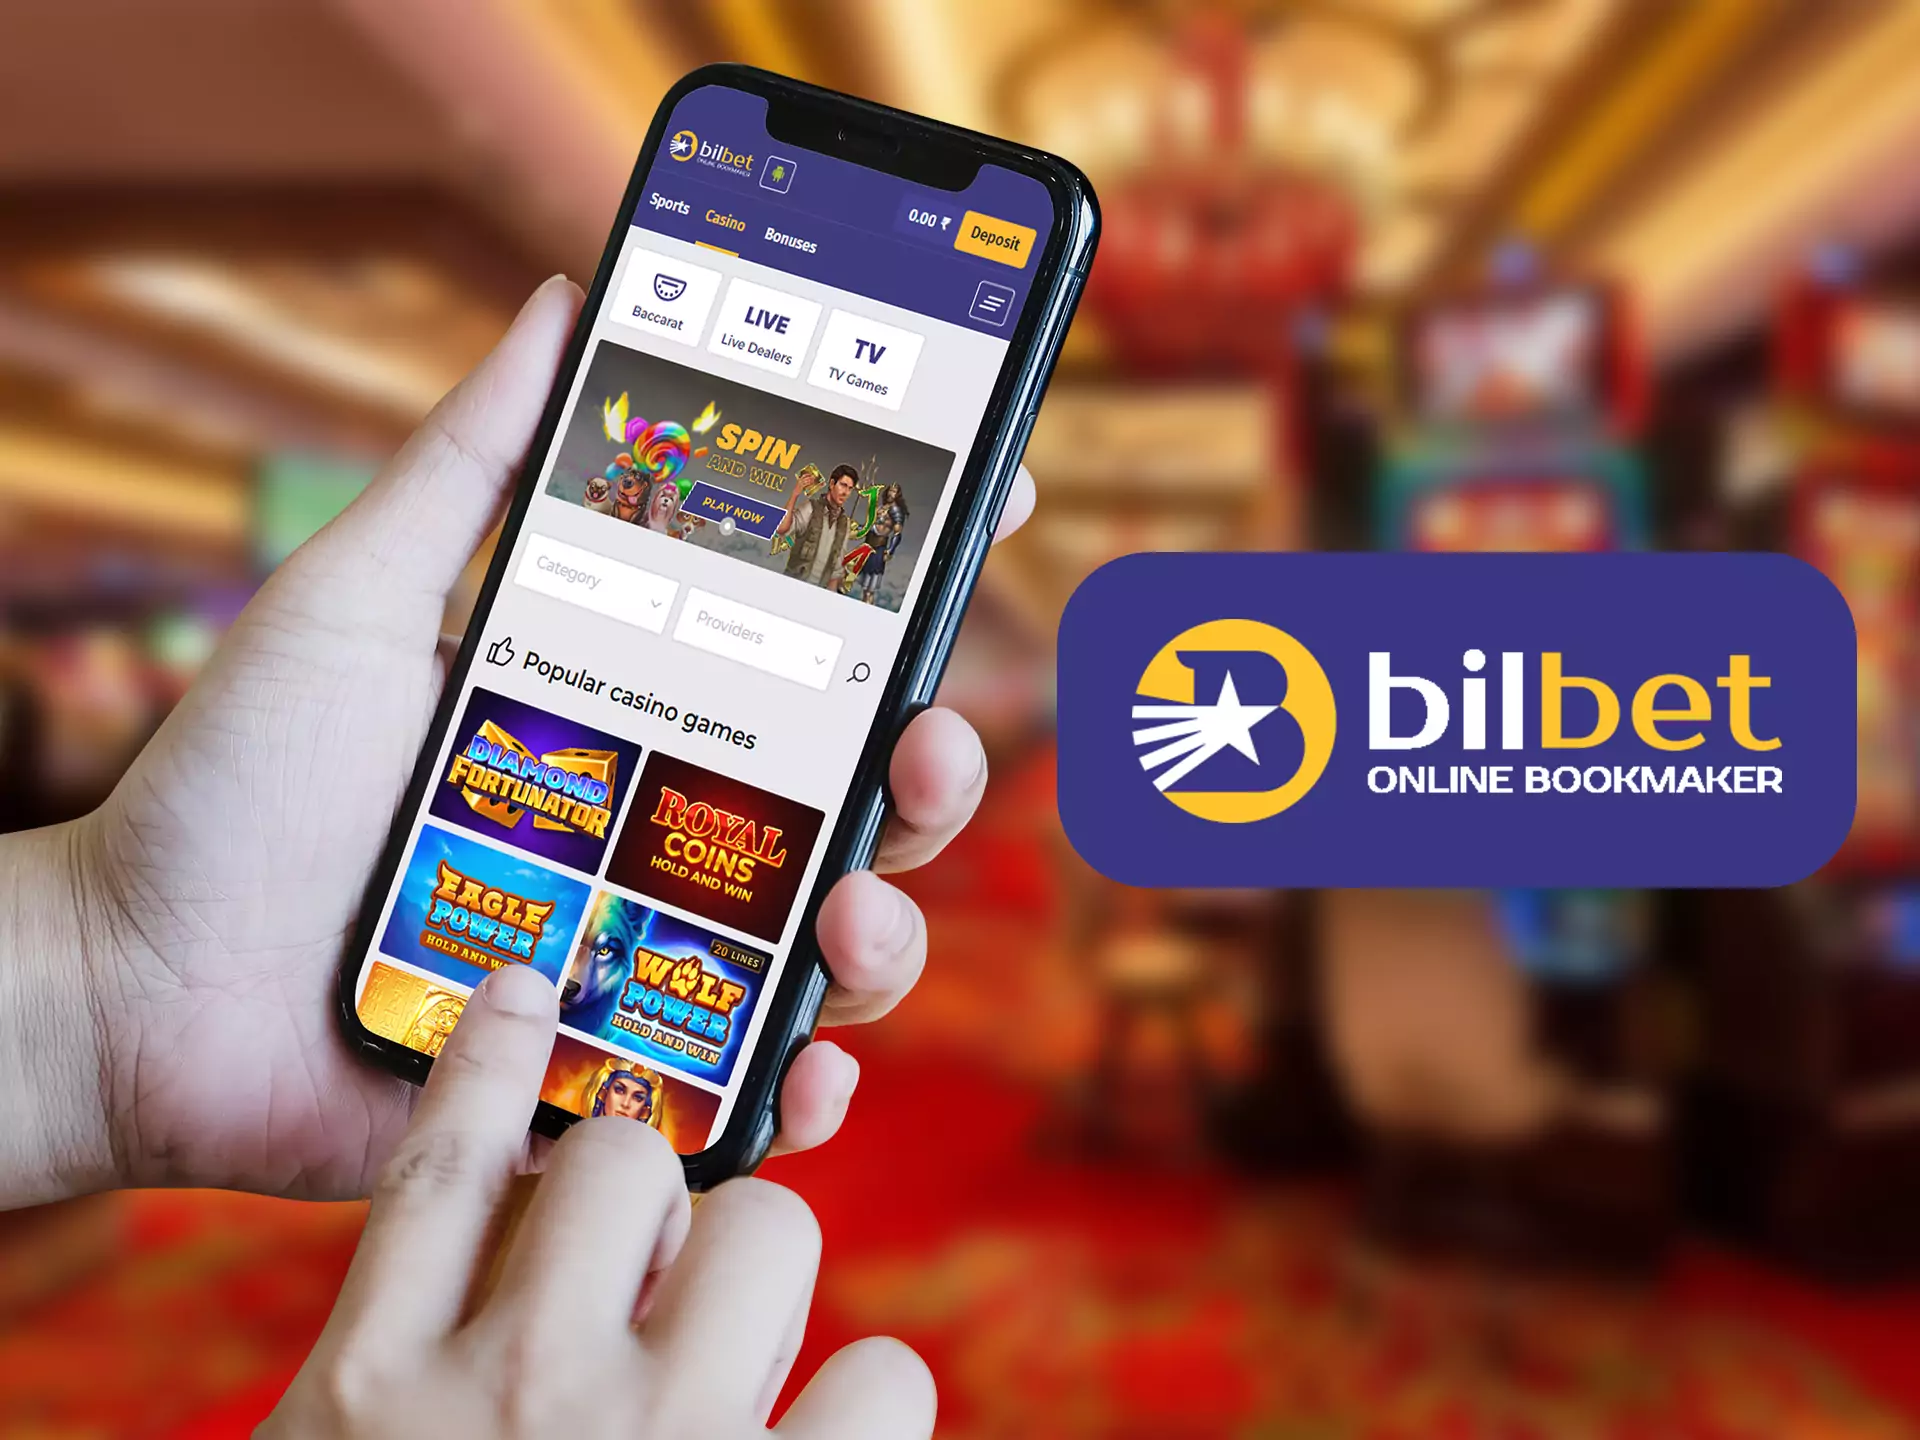 Play Bilbet casino games with you phone.